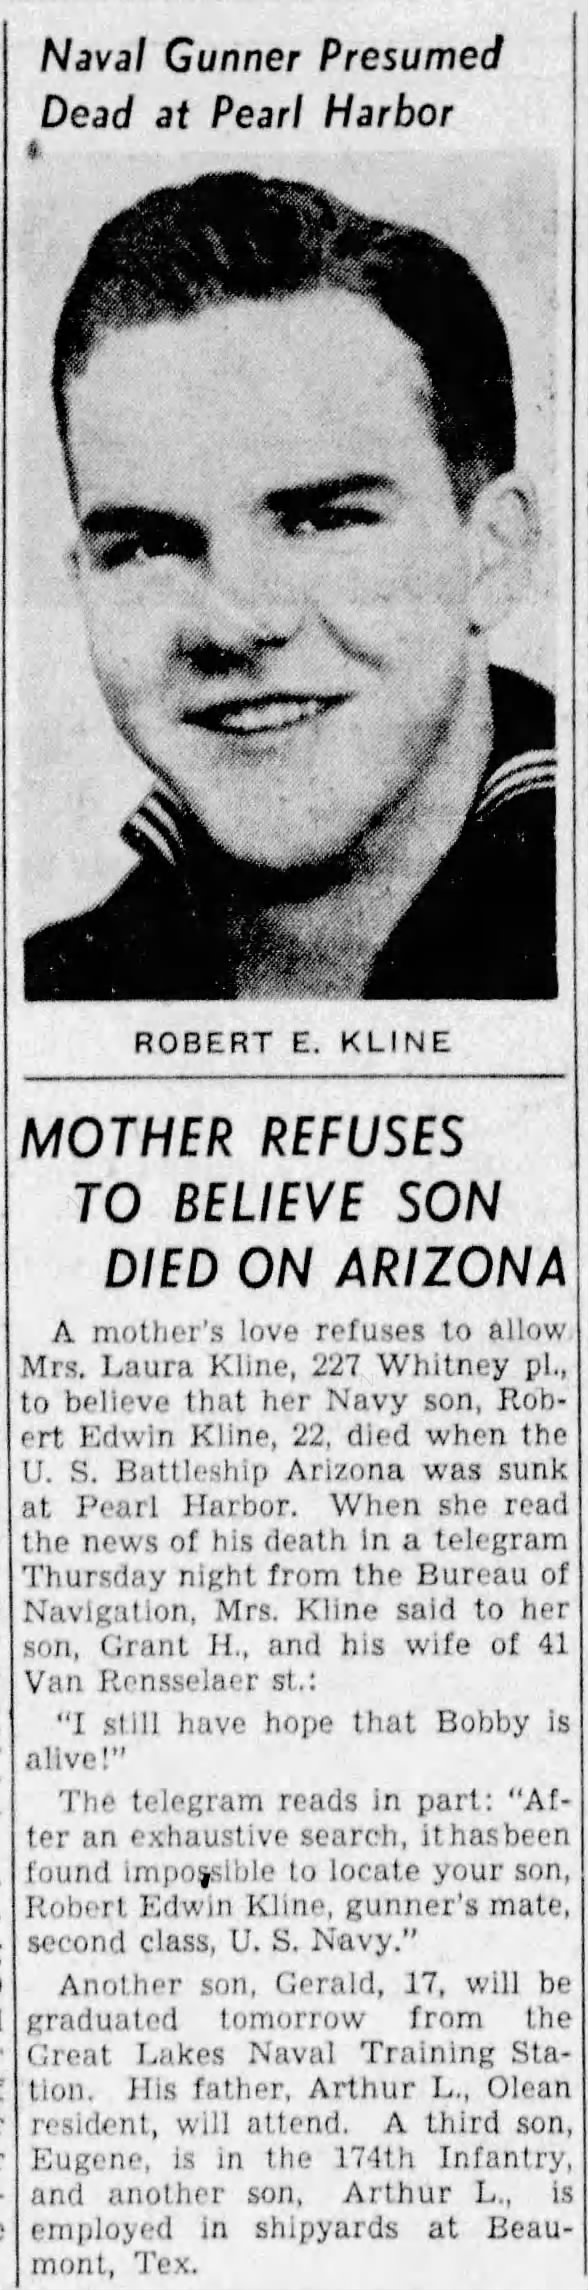 Laura Kline holds out hope to find son missing on the USS Arizona 